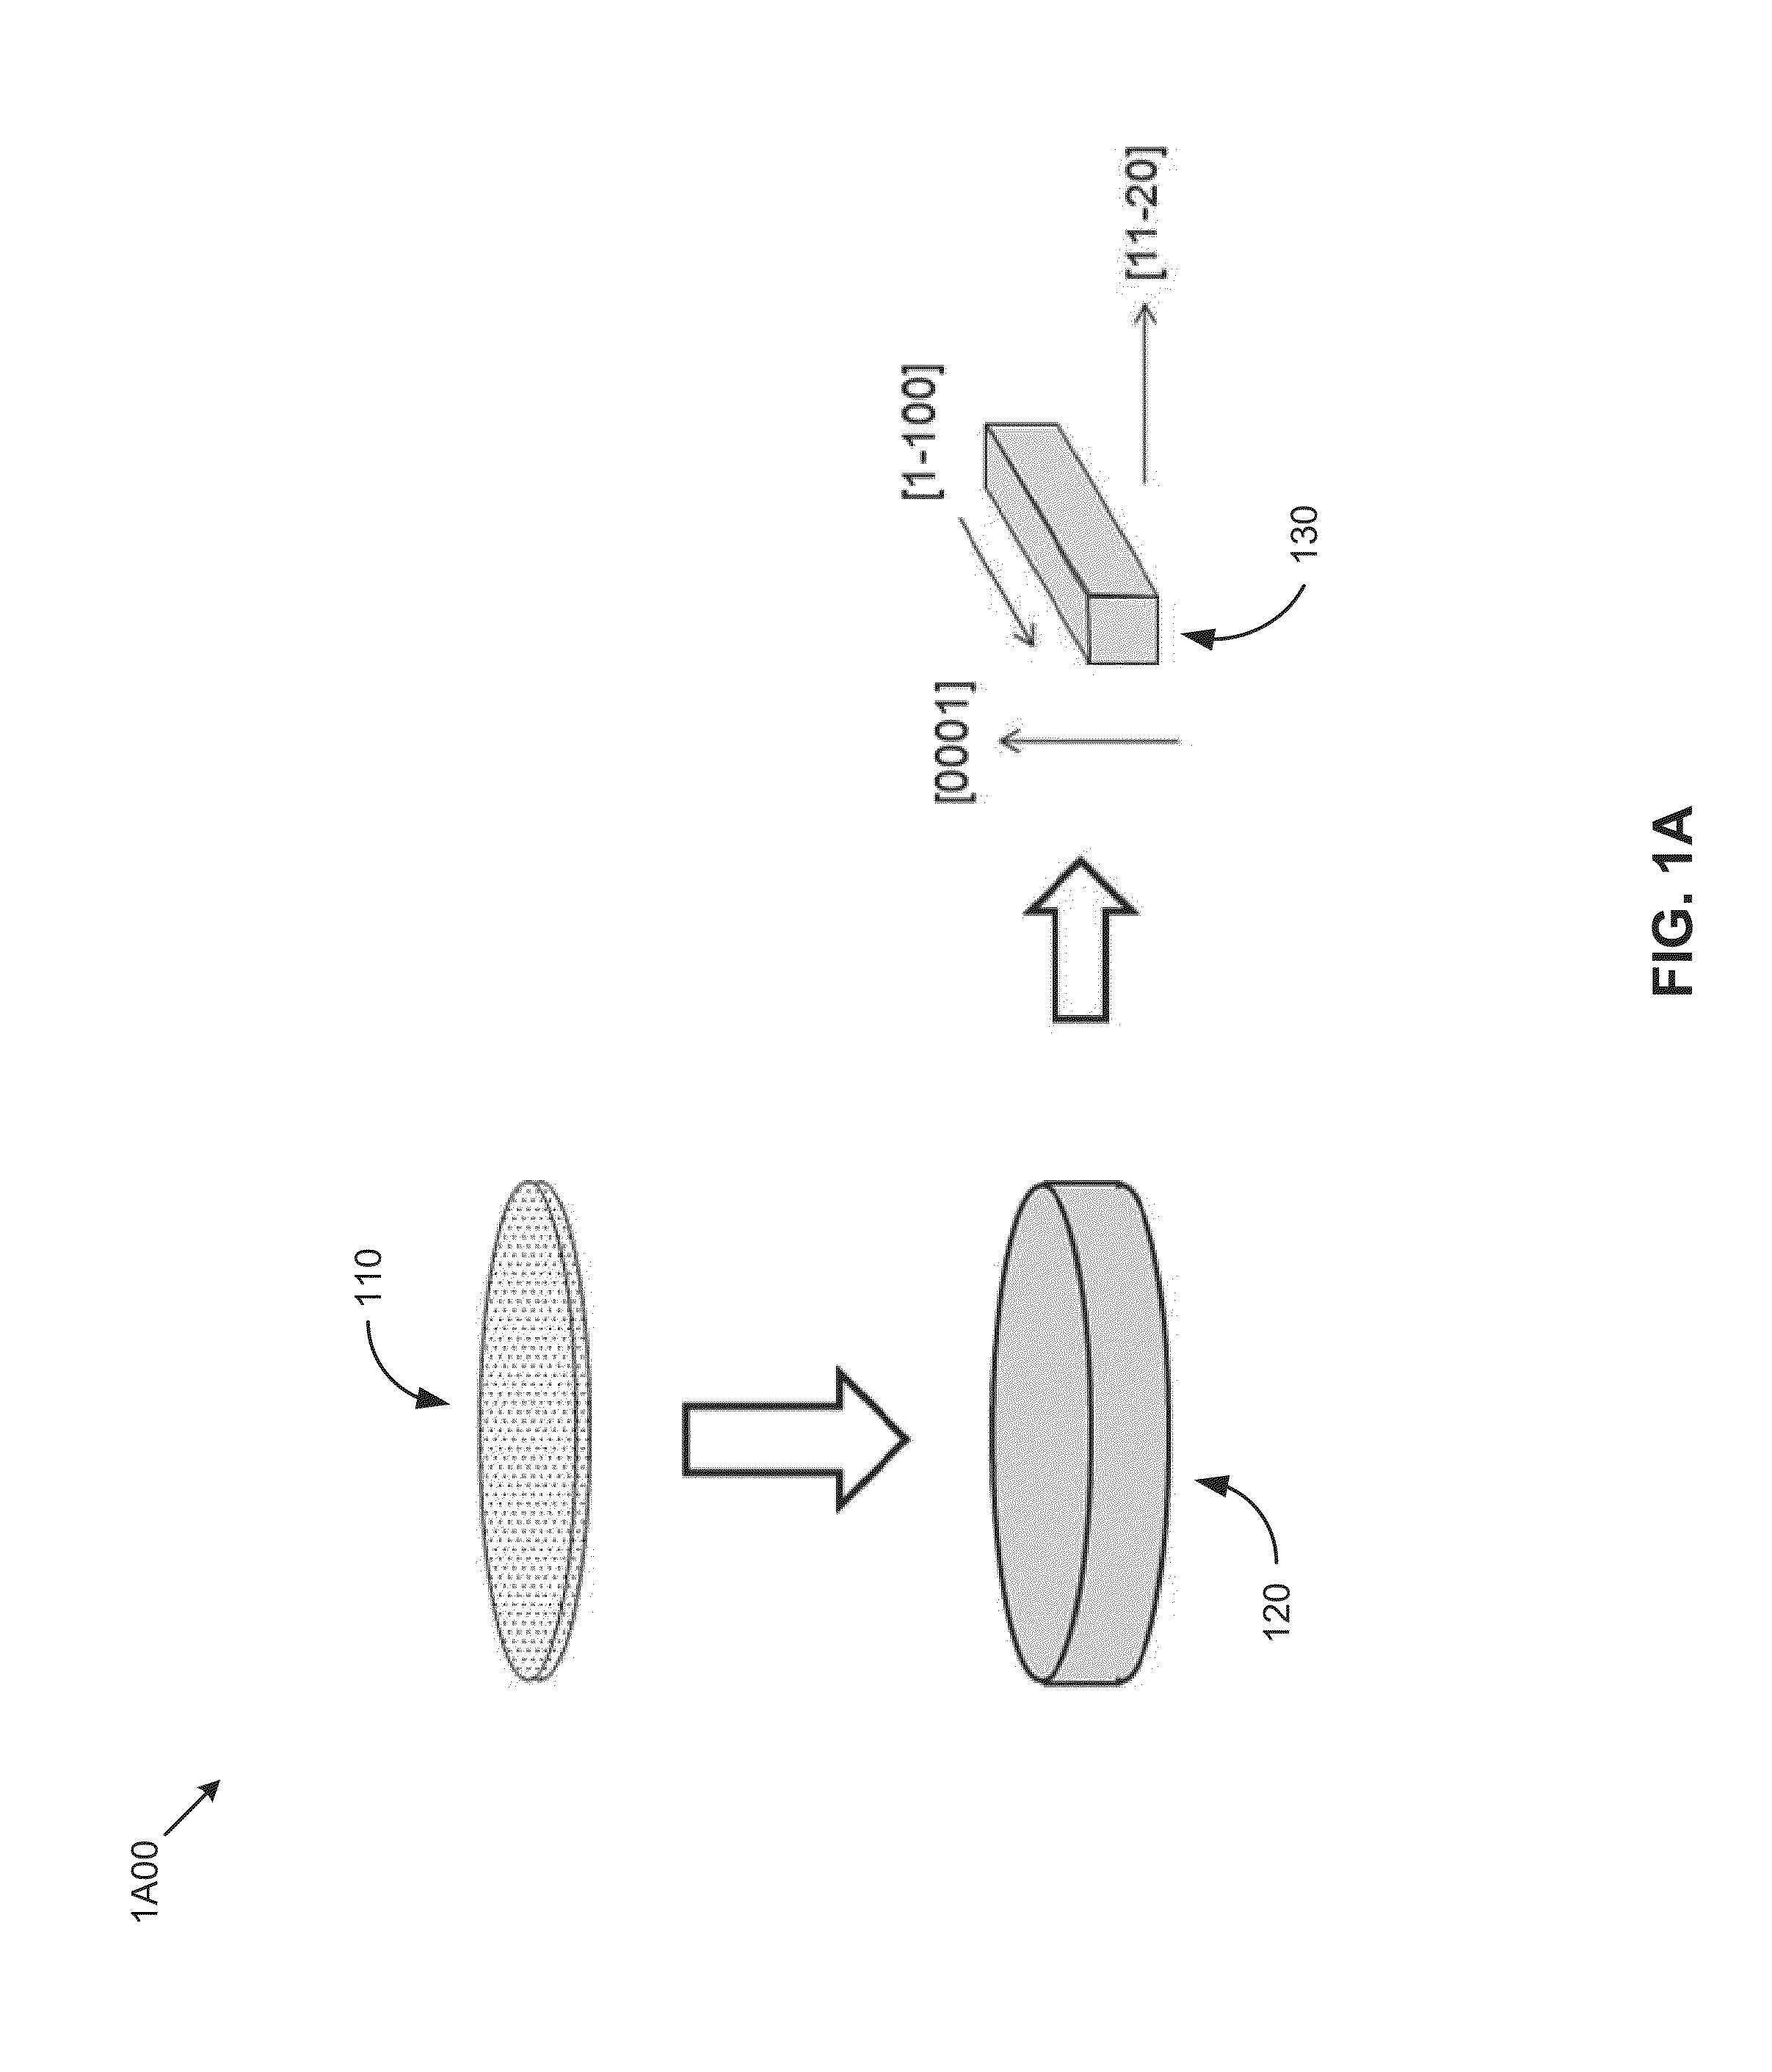 Large Area, Low-Defect Gallium-Containing Nitride Crystals, Method of Making, and Method of Use